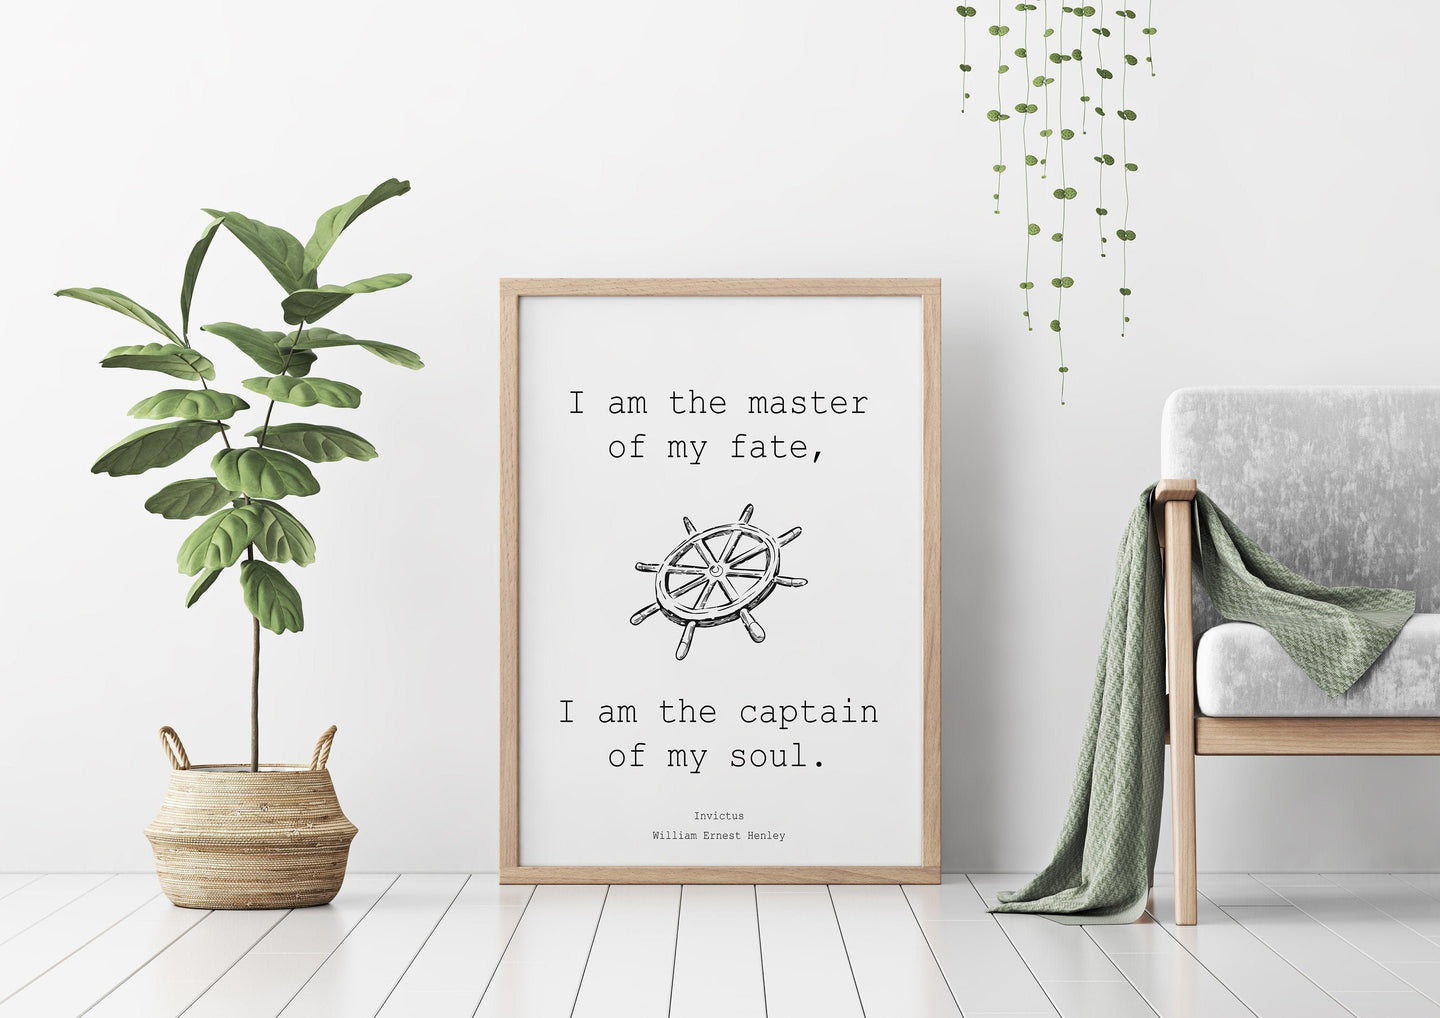 Invictus poem William Ernest Henley Poem Art Print Unframed office Wall Art poetry art - I am the master of my fate... captain of my soul.